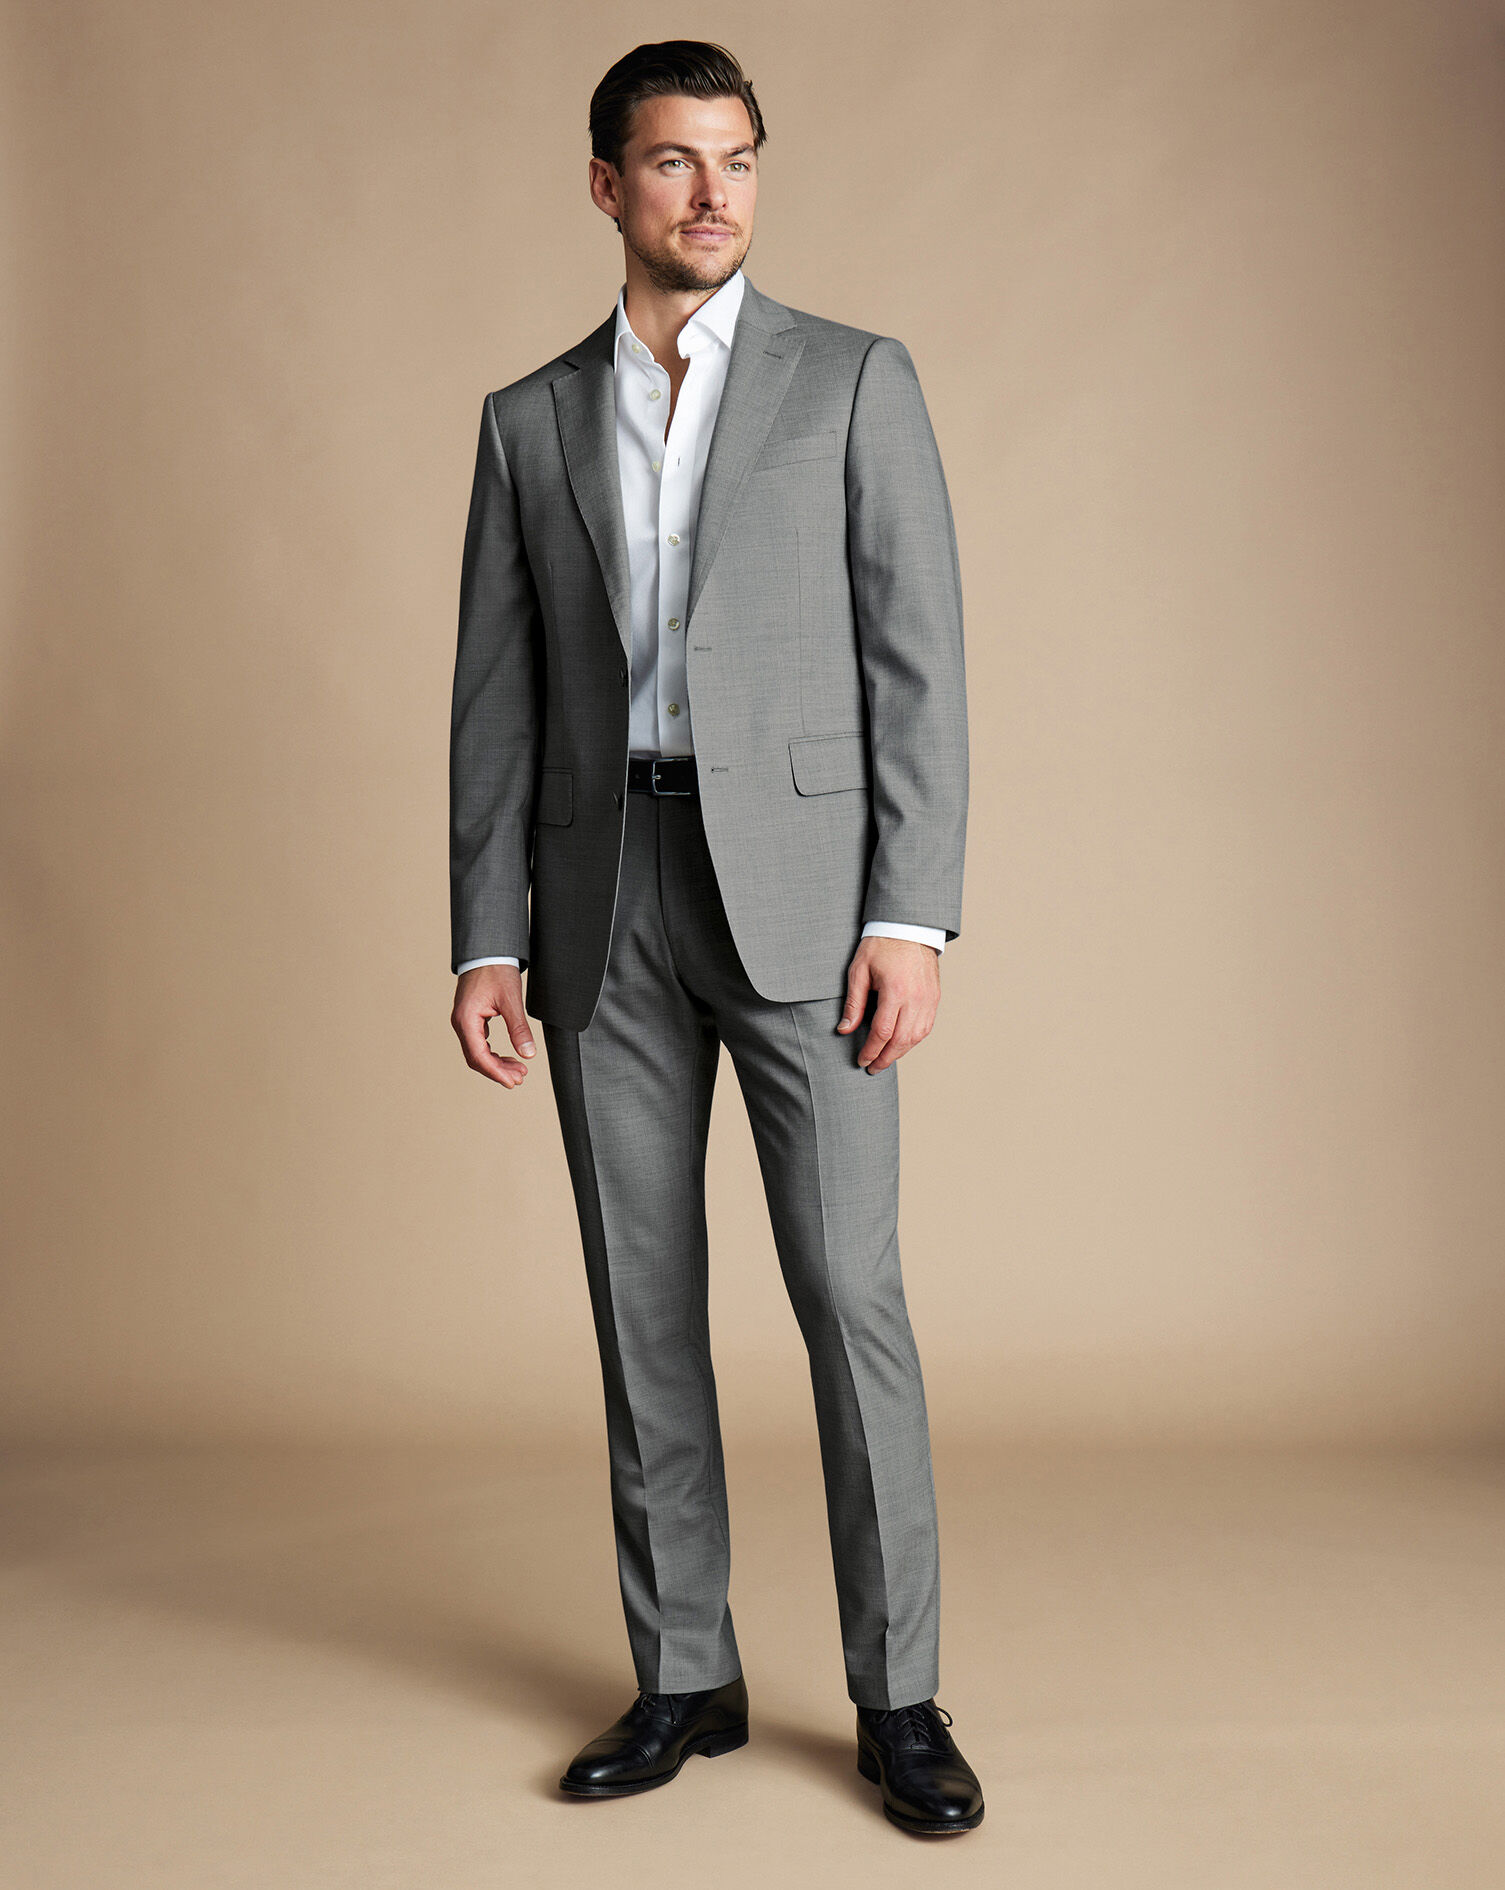 The Best Gray Tweed Suits for Men | GQ